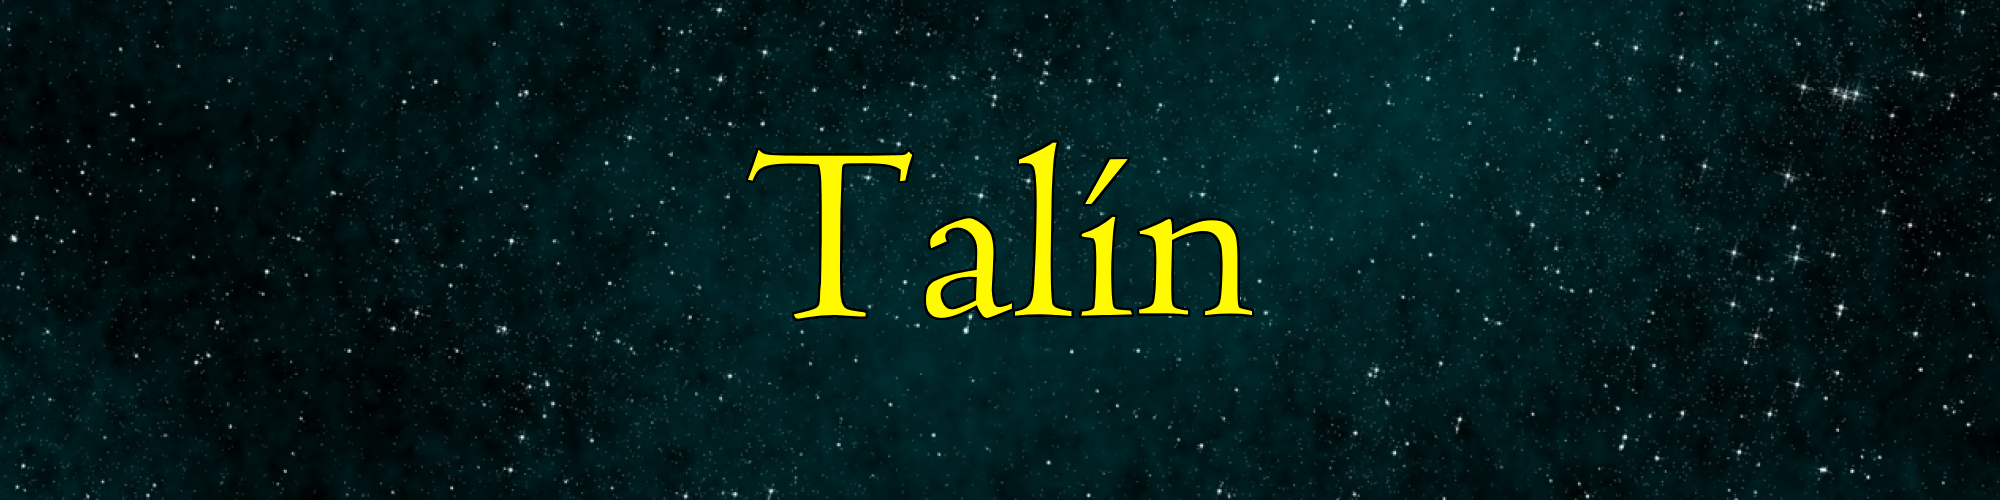 Talin - The adventure behind the story